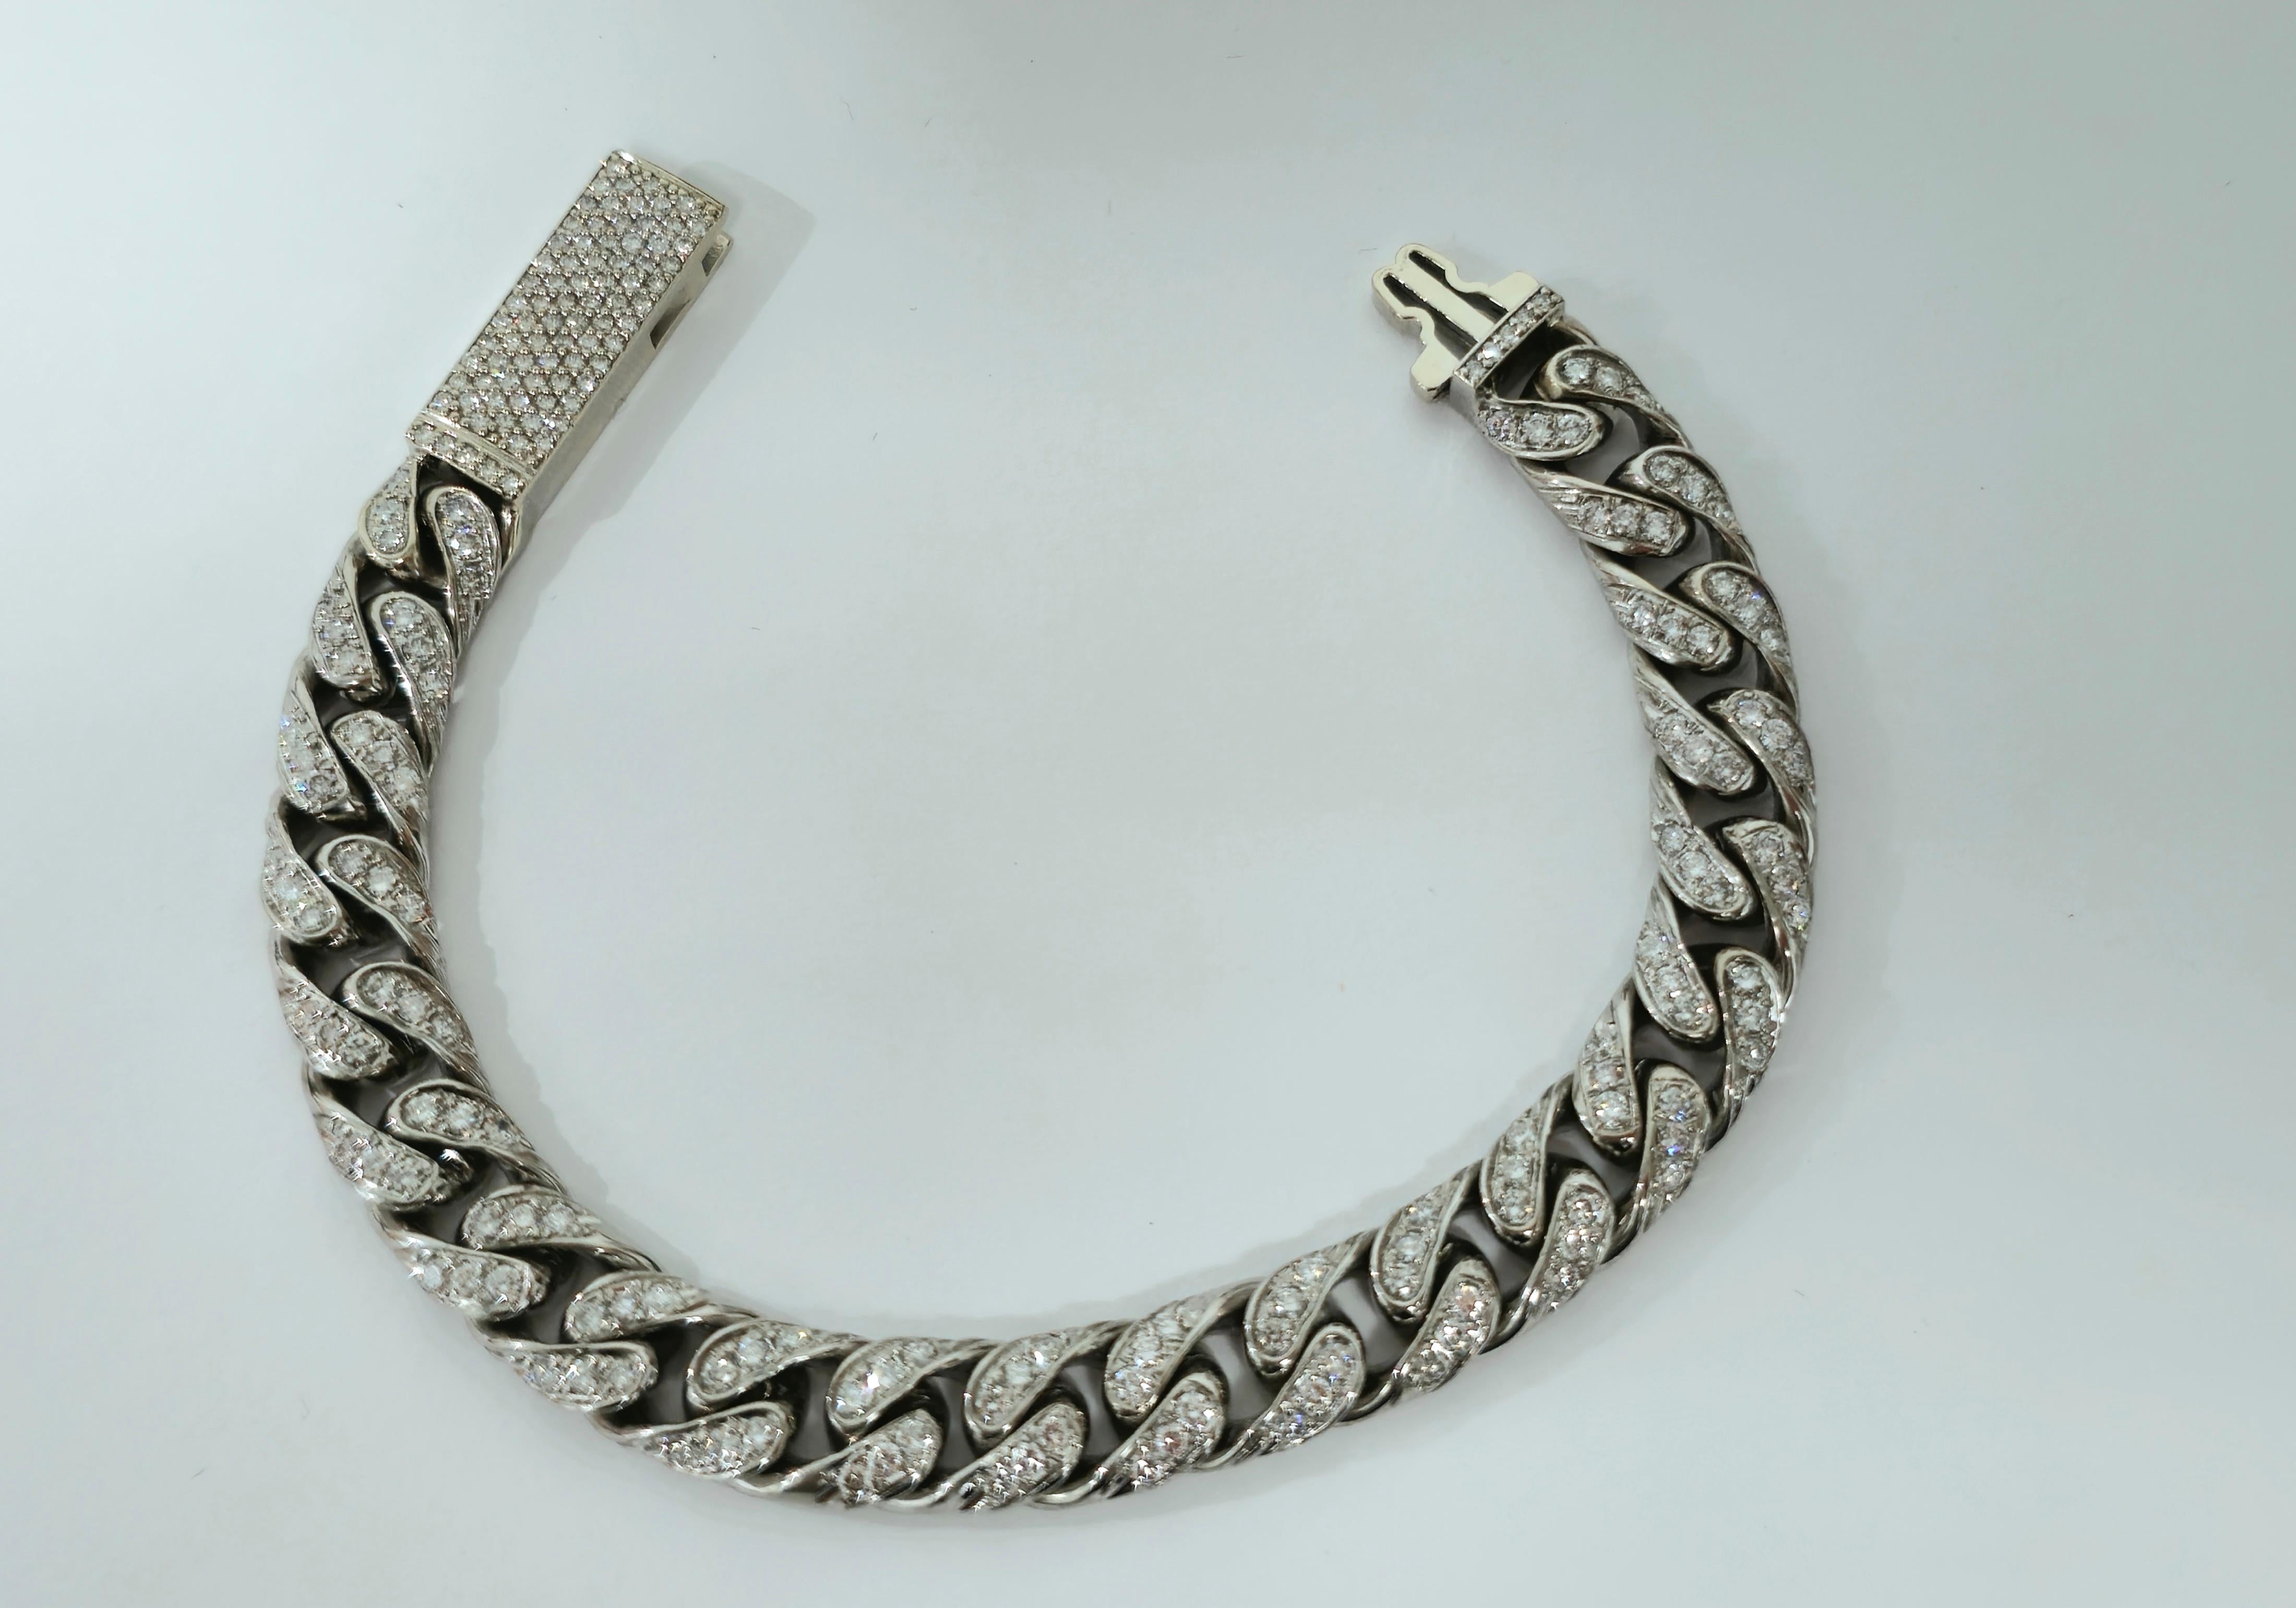 Handcrafted from lavish 18k white gold, this stunning cuban link bracelet boasts a total of 9.82 carats of natural earth mined diamonds, each exhibiting impeccable VS clarity and G color. The round brilliant-cut diamonds are meticulously set,